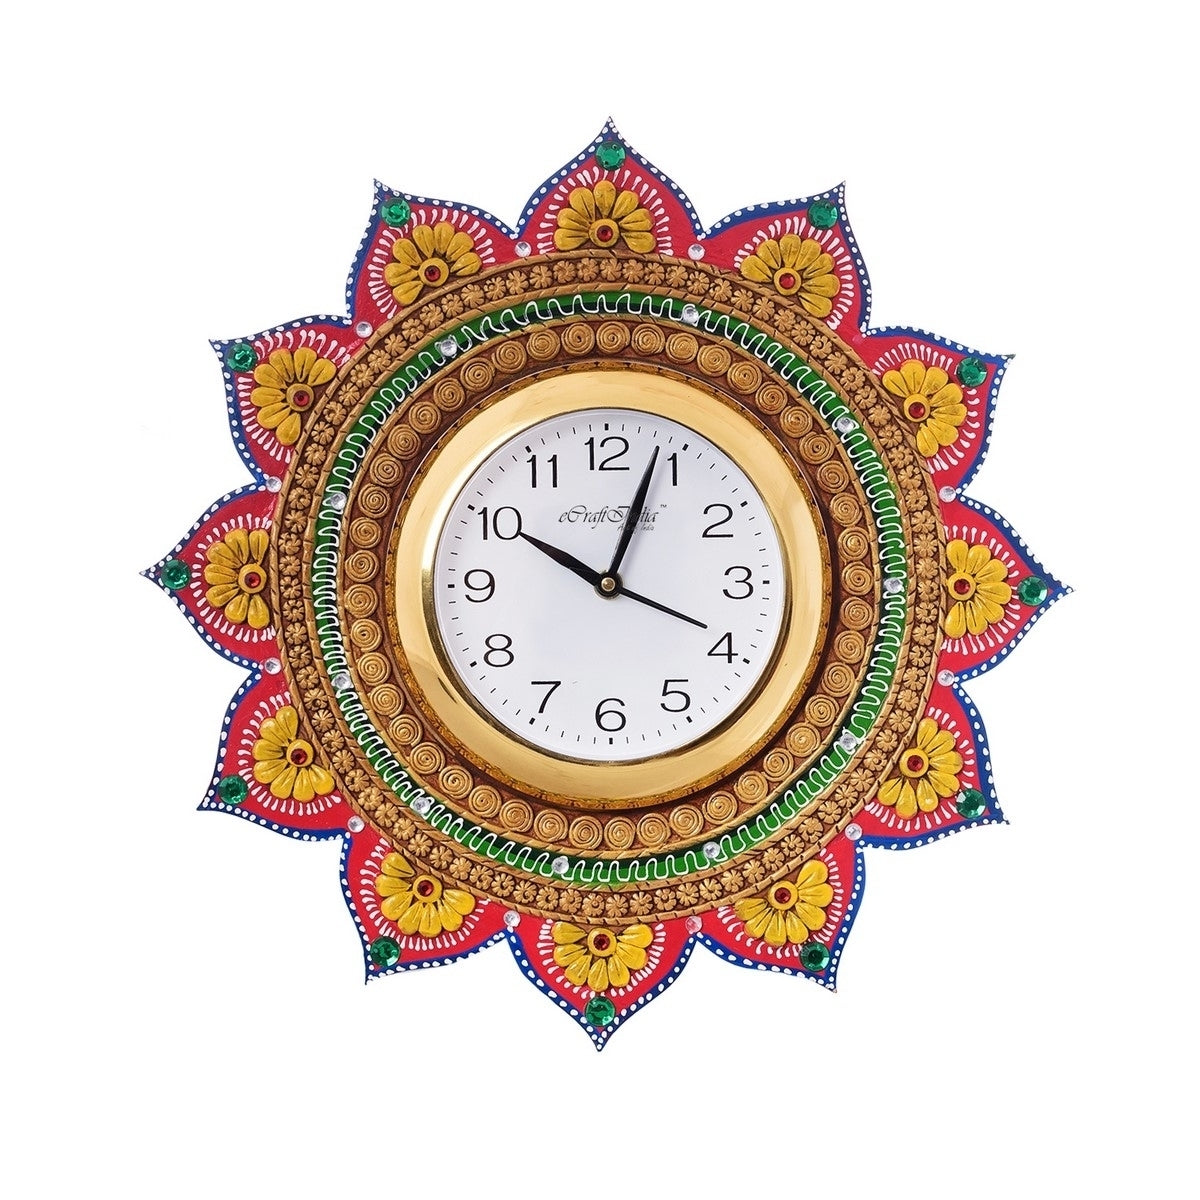 Sublime and Decorative Papier-Mache Wooden Handcrafted Wall Clock